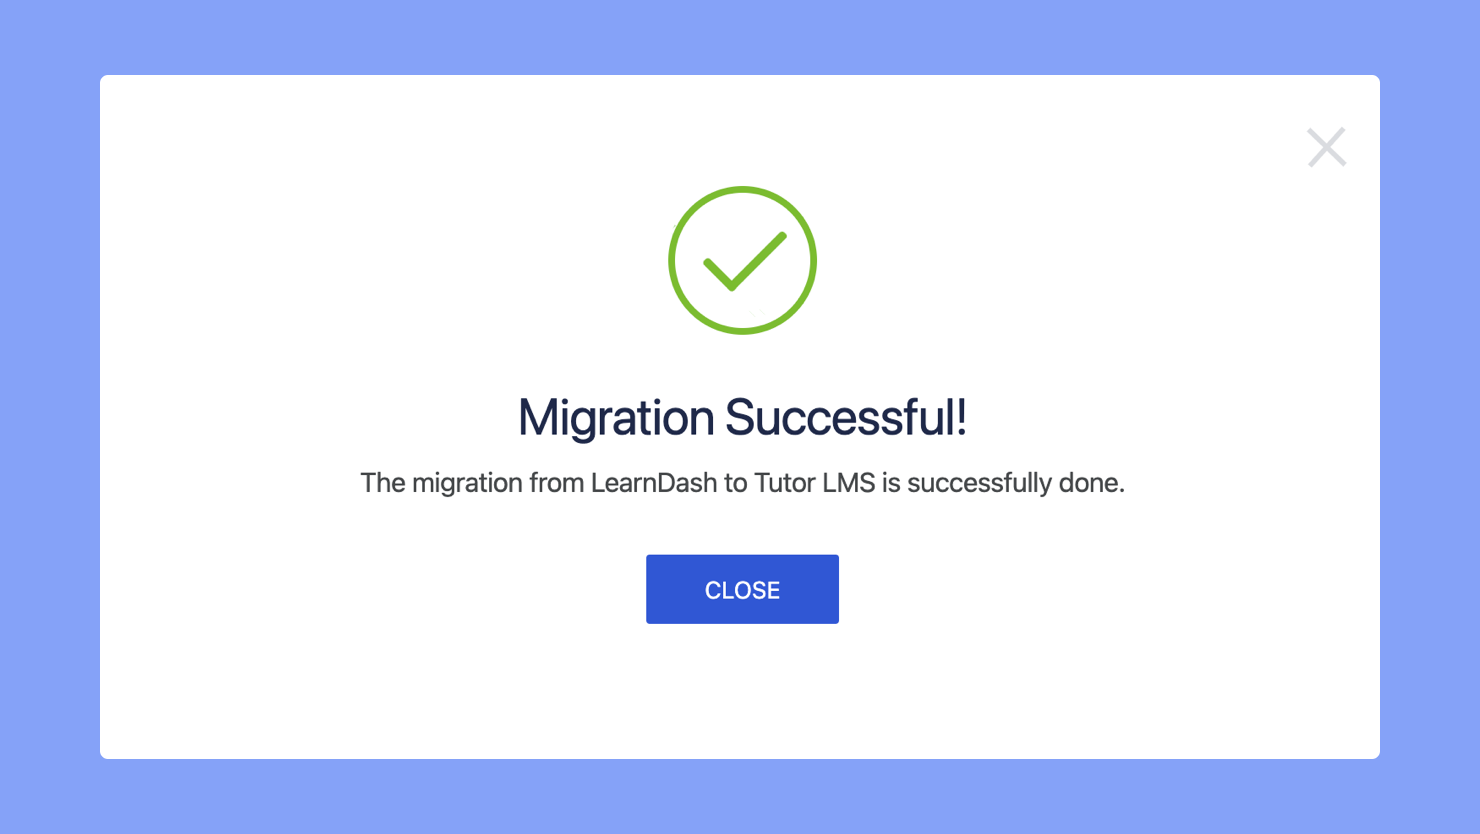 How to Migrate From LearnDash to Tutor LMS